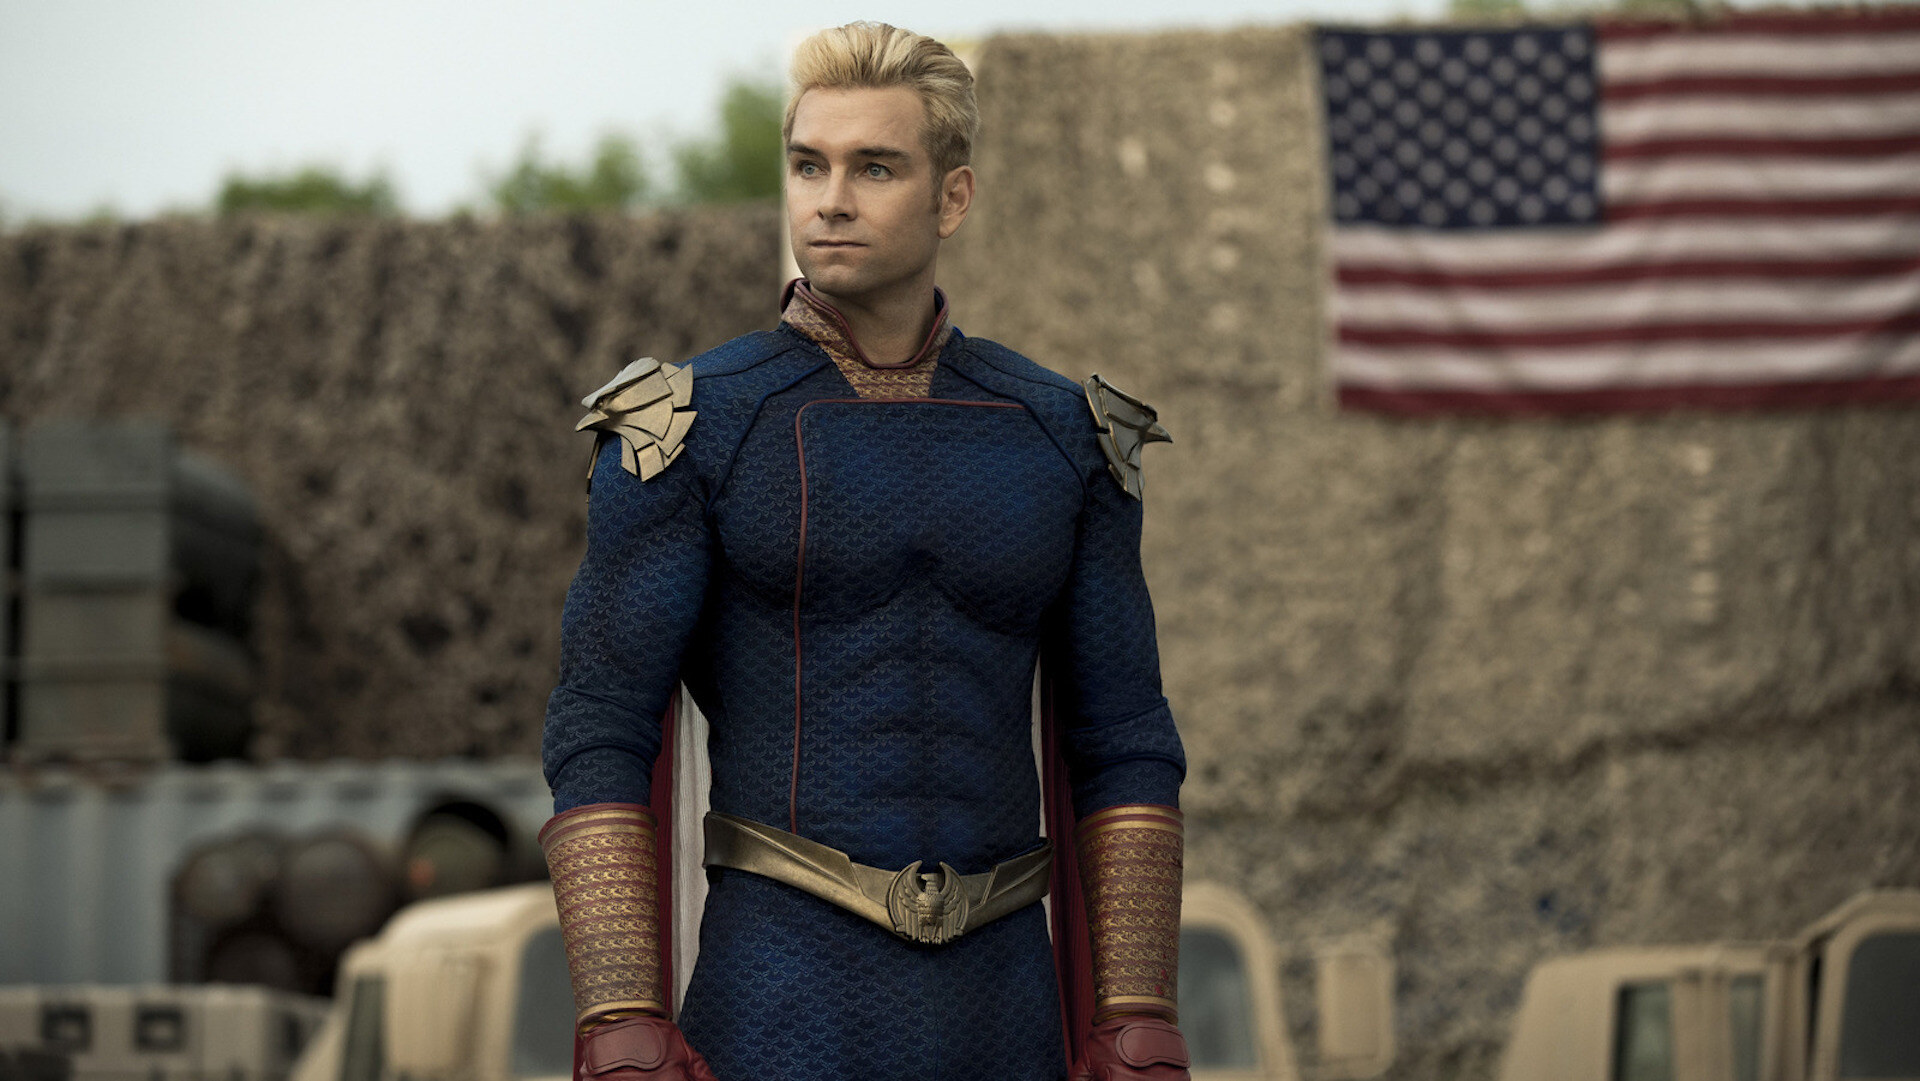 Homelander (Antony Starr) standing in front of an American flag in 'The Boys'